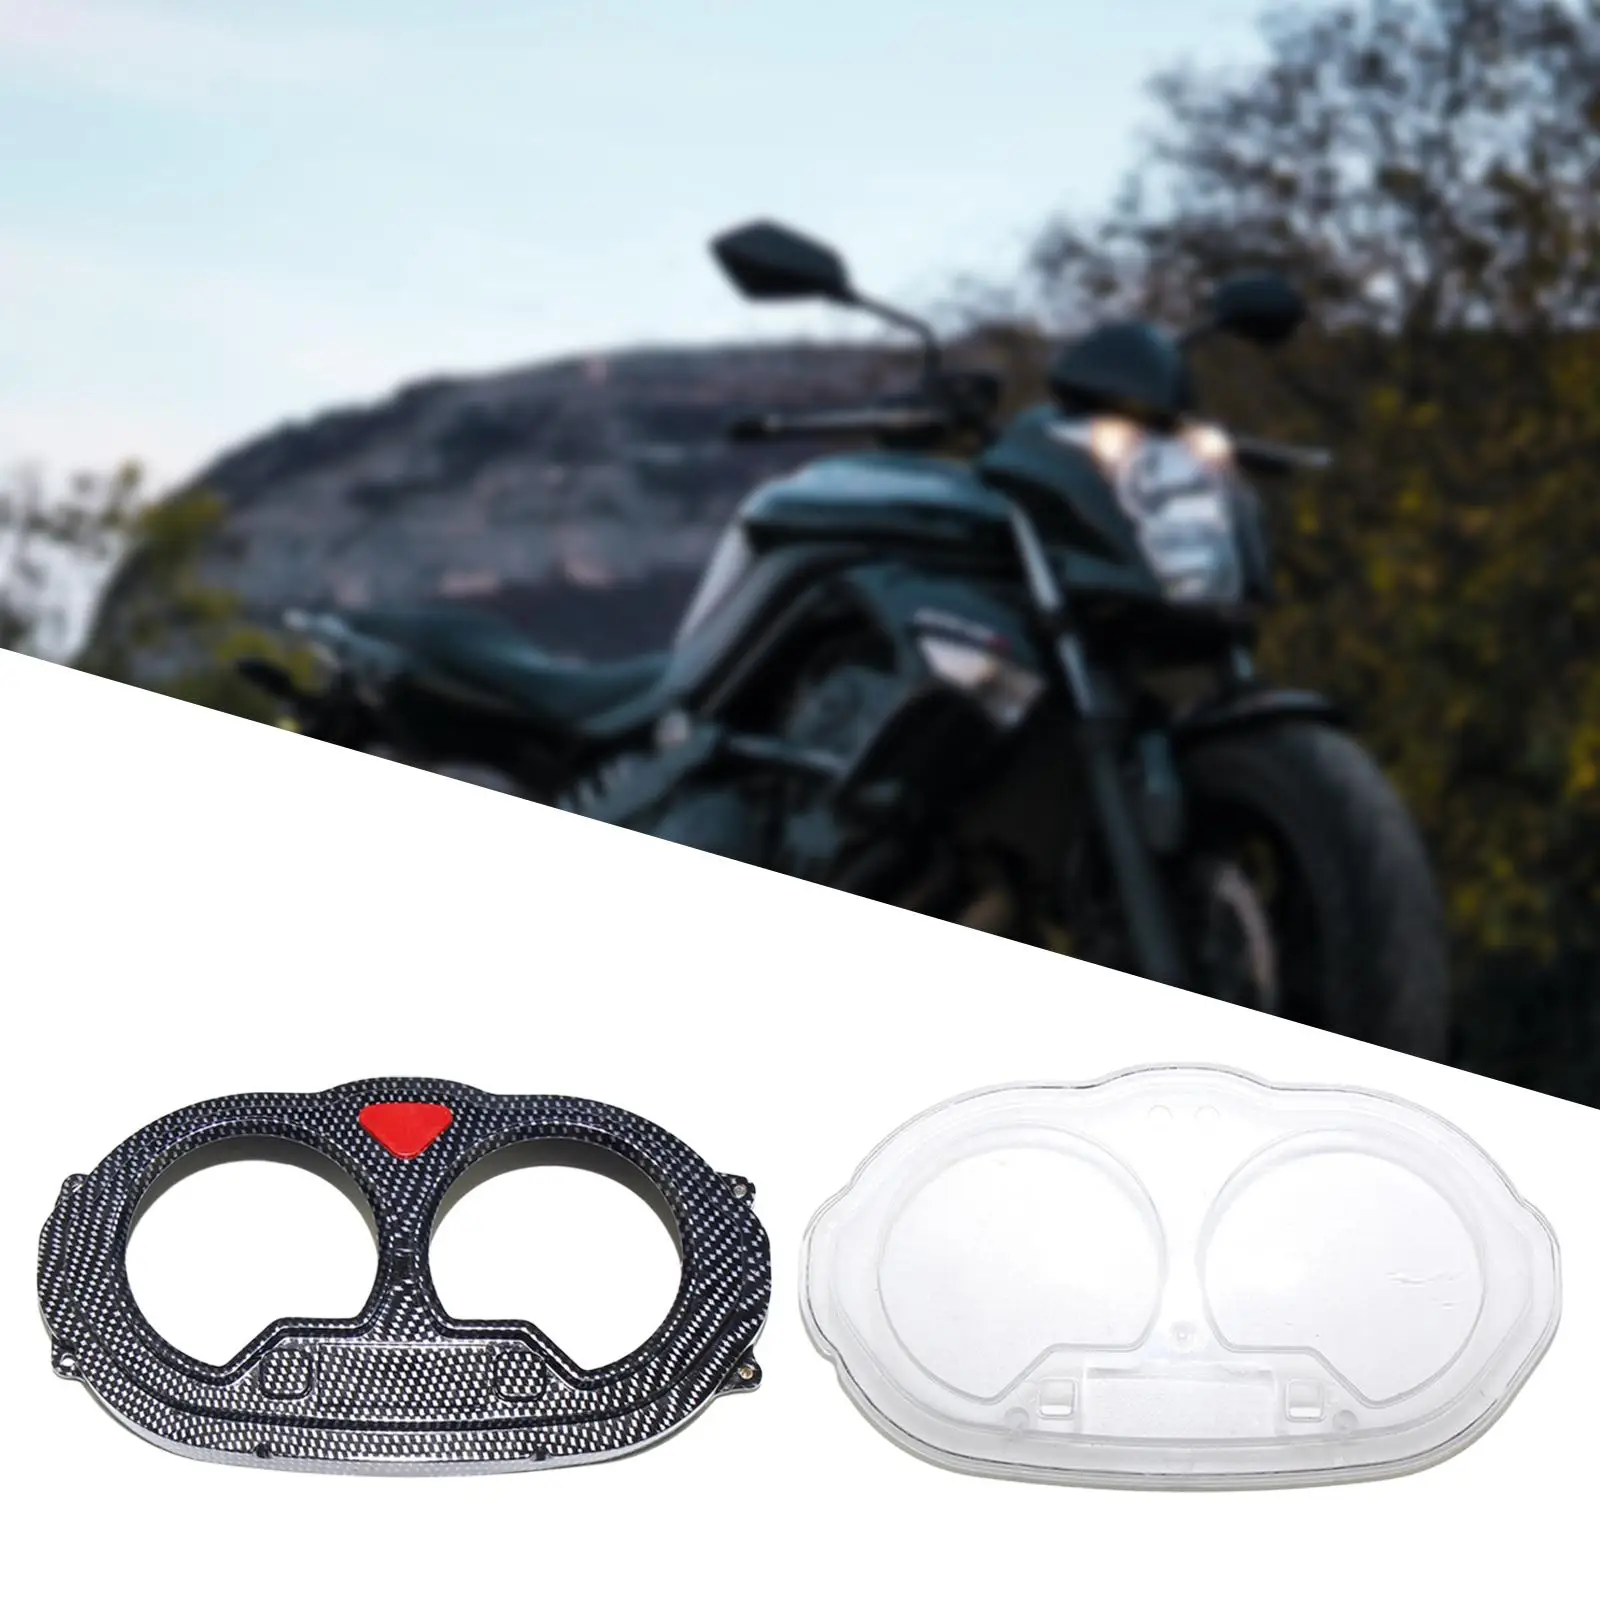 Upper Shell of Instrument Motorbike Dashboard Cover Motorbike Parts    Housing Cover for Case